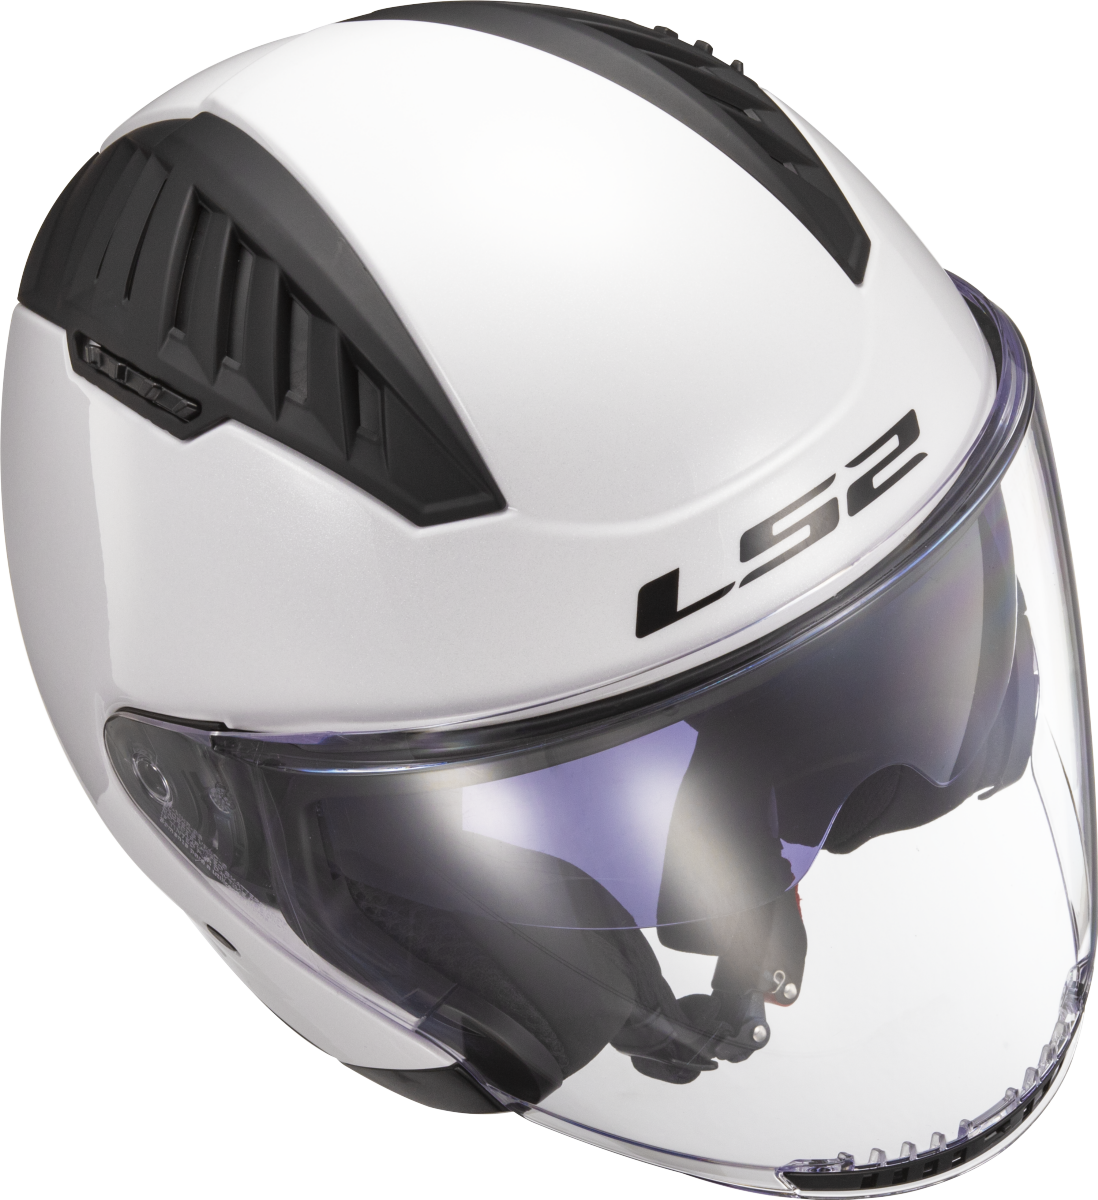 Casco LS2 OF600 COPTER SOLID BLANCO 5